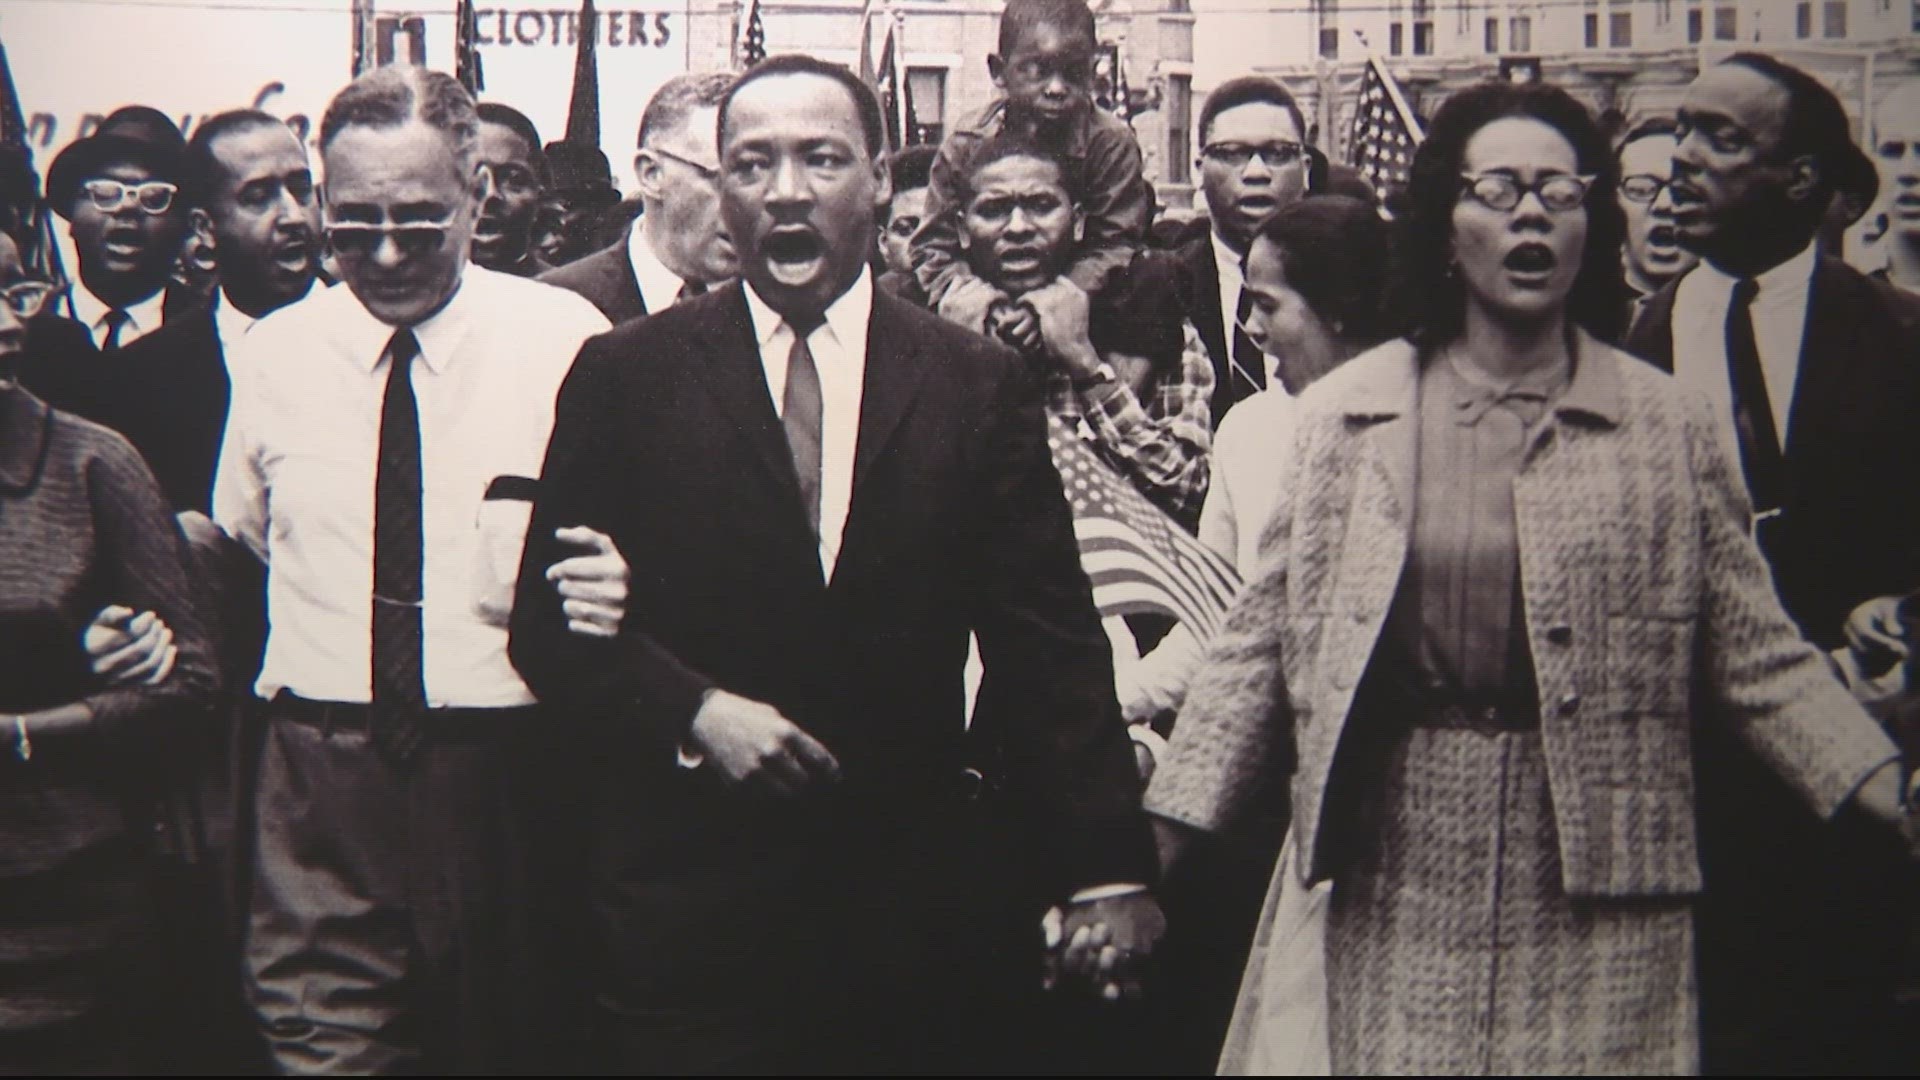 You can check out a special exhibit dedicated to this moment at the National Museum of African American History and Culture.